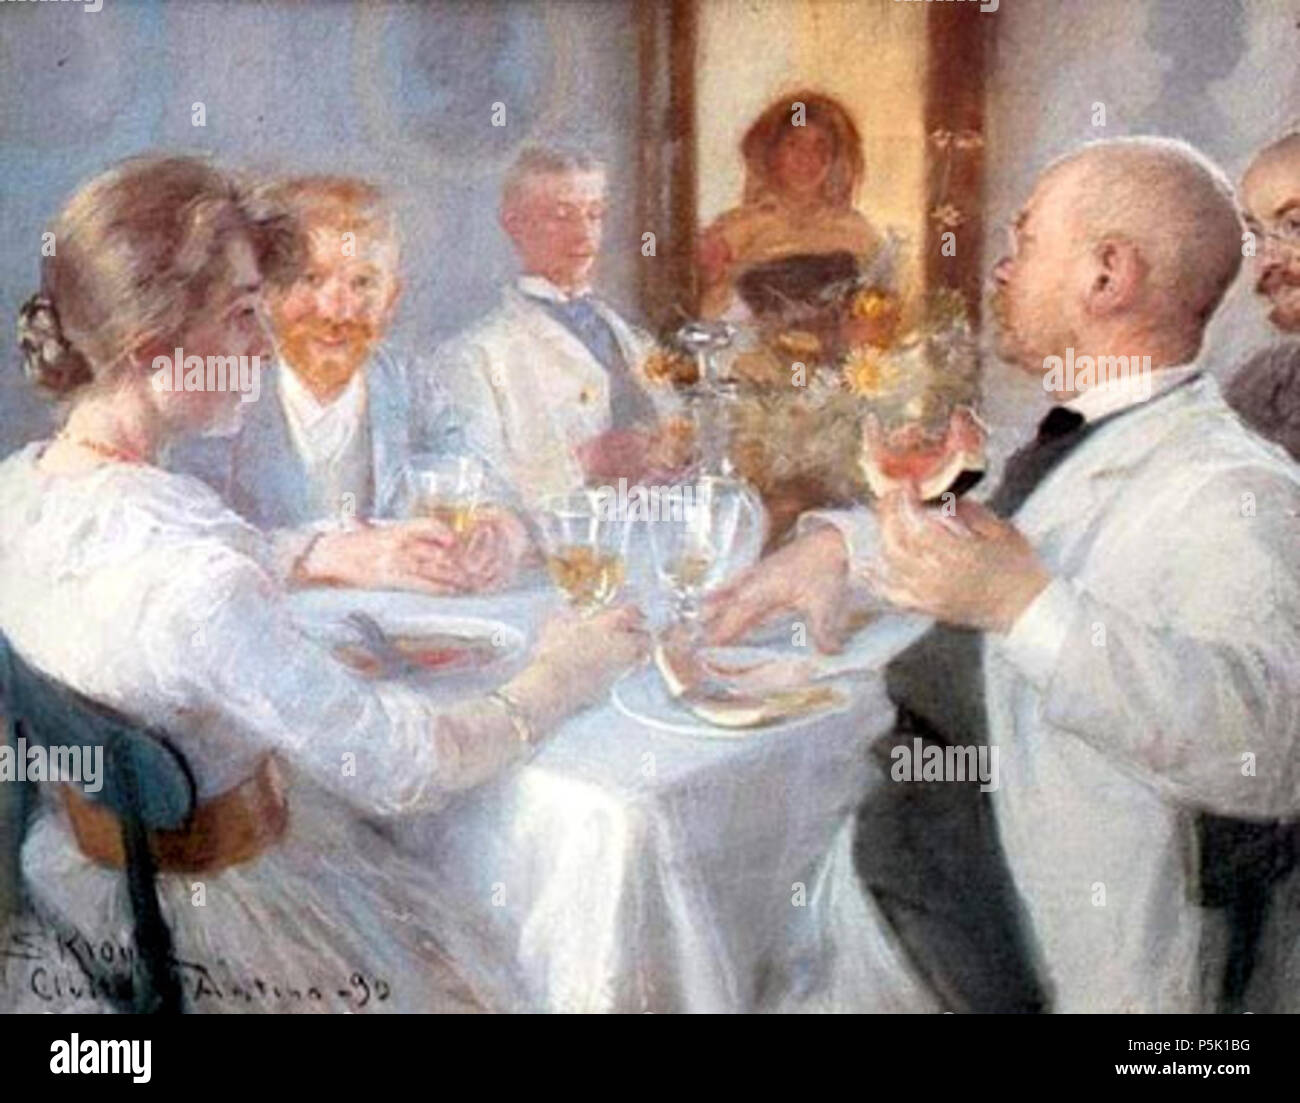 At the Lunch Table in Civita d'Antino .  English: Painting by the Norwegian-born Danish artist P.S. Krøyer titled Ved frokostborder i Civita d'Antino (At the Lunch Table in Civita d'Antino). The scene at Kristian Zahrtmann's lodgings in Casa Cerroni includes (from left) Marie Krøyer, P.S. Krøyer, the young painter Henry Lørup, an Italian waitress, Zahrtmann and the painter Peter Tom-Petersen. (Source: Peter Michael Hornung, Peder Severin Krøyer, 2005, page 240. . 1890. N/A 31 Civita dantino kroyer frokost Stock Photo